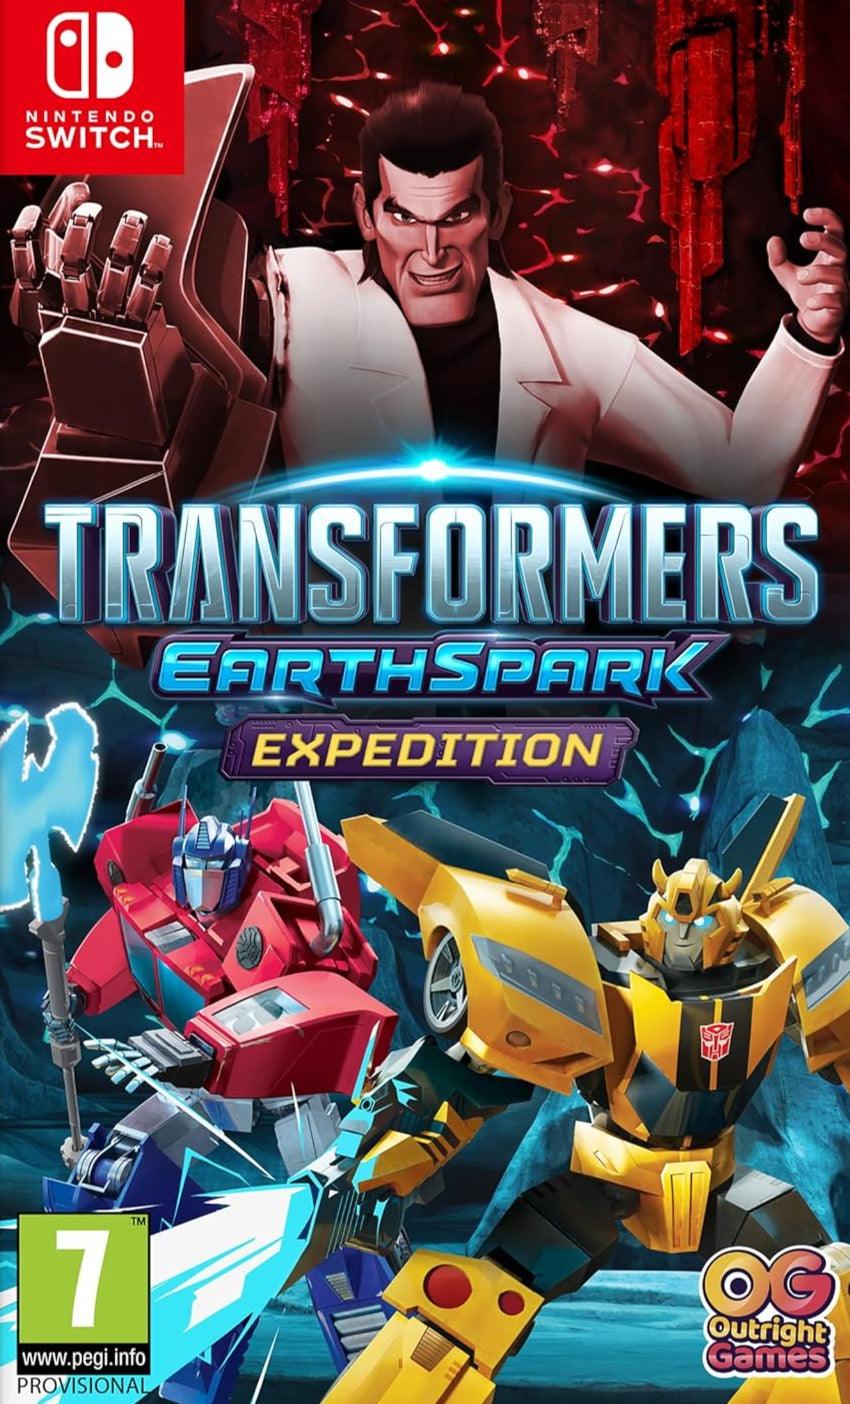 Transformers Earth Spark Expedition - Nintendo Switch - GD Games 